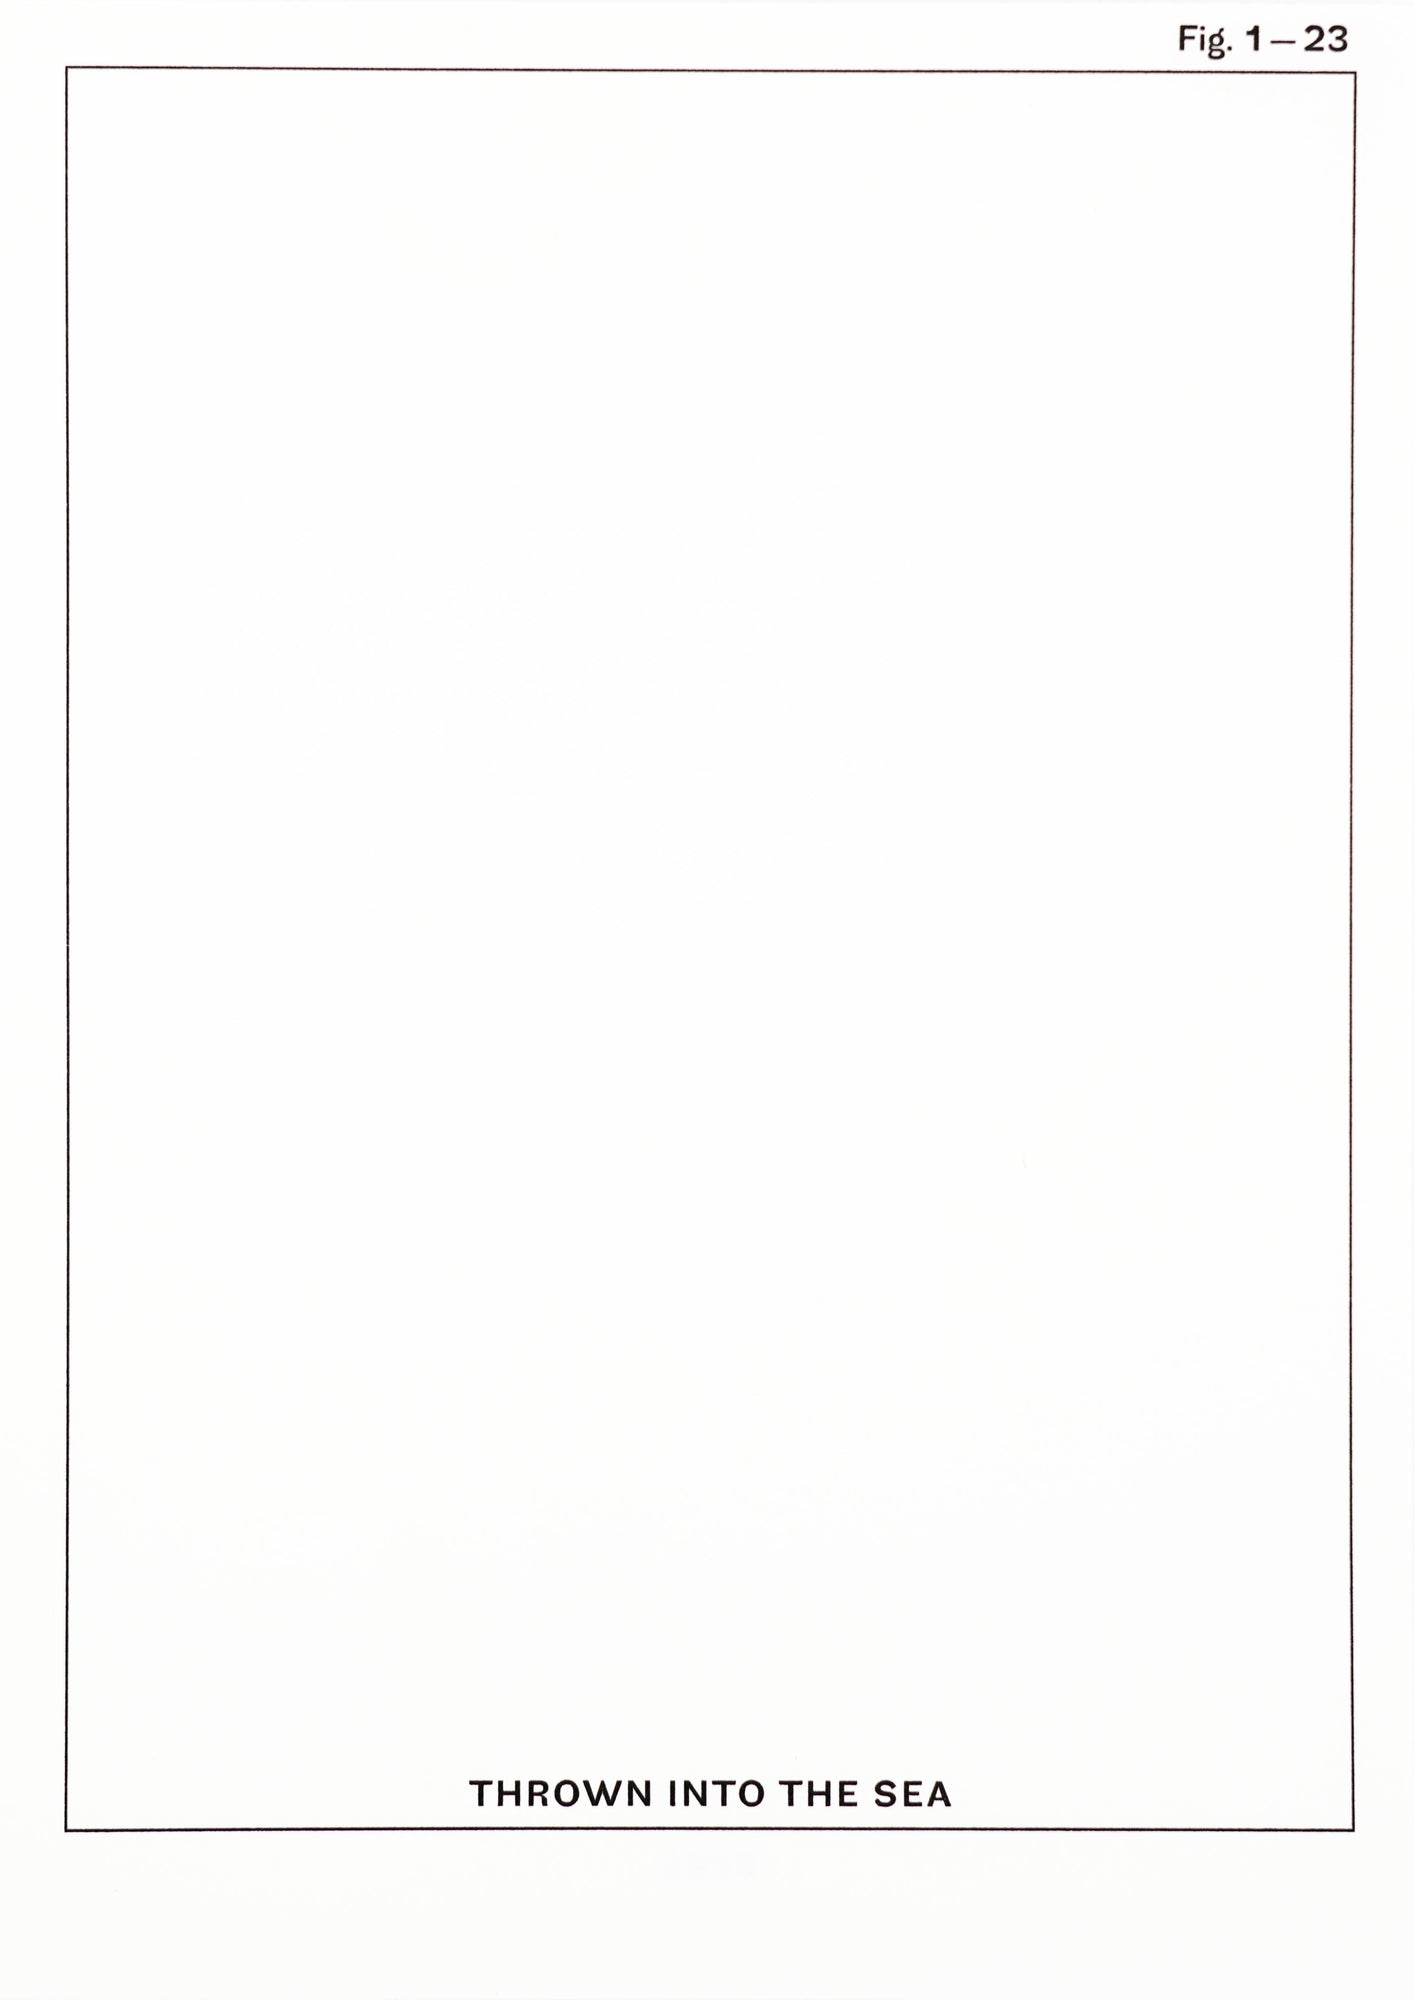 White page with the outline of a rectangle and the words THROWN INTO THE SEA written on the lower third of the page. On the very upper right corner it says Fig. 1-23 in black sans serif. 